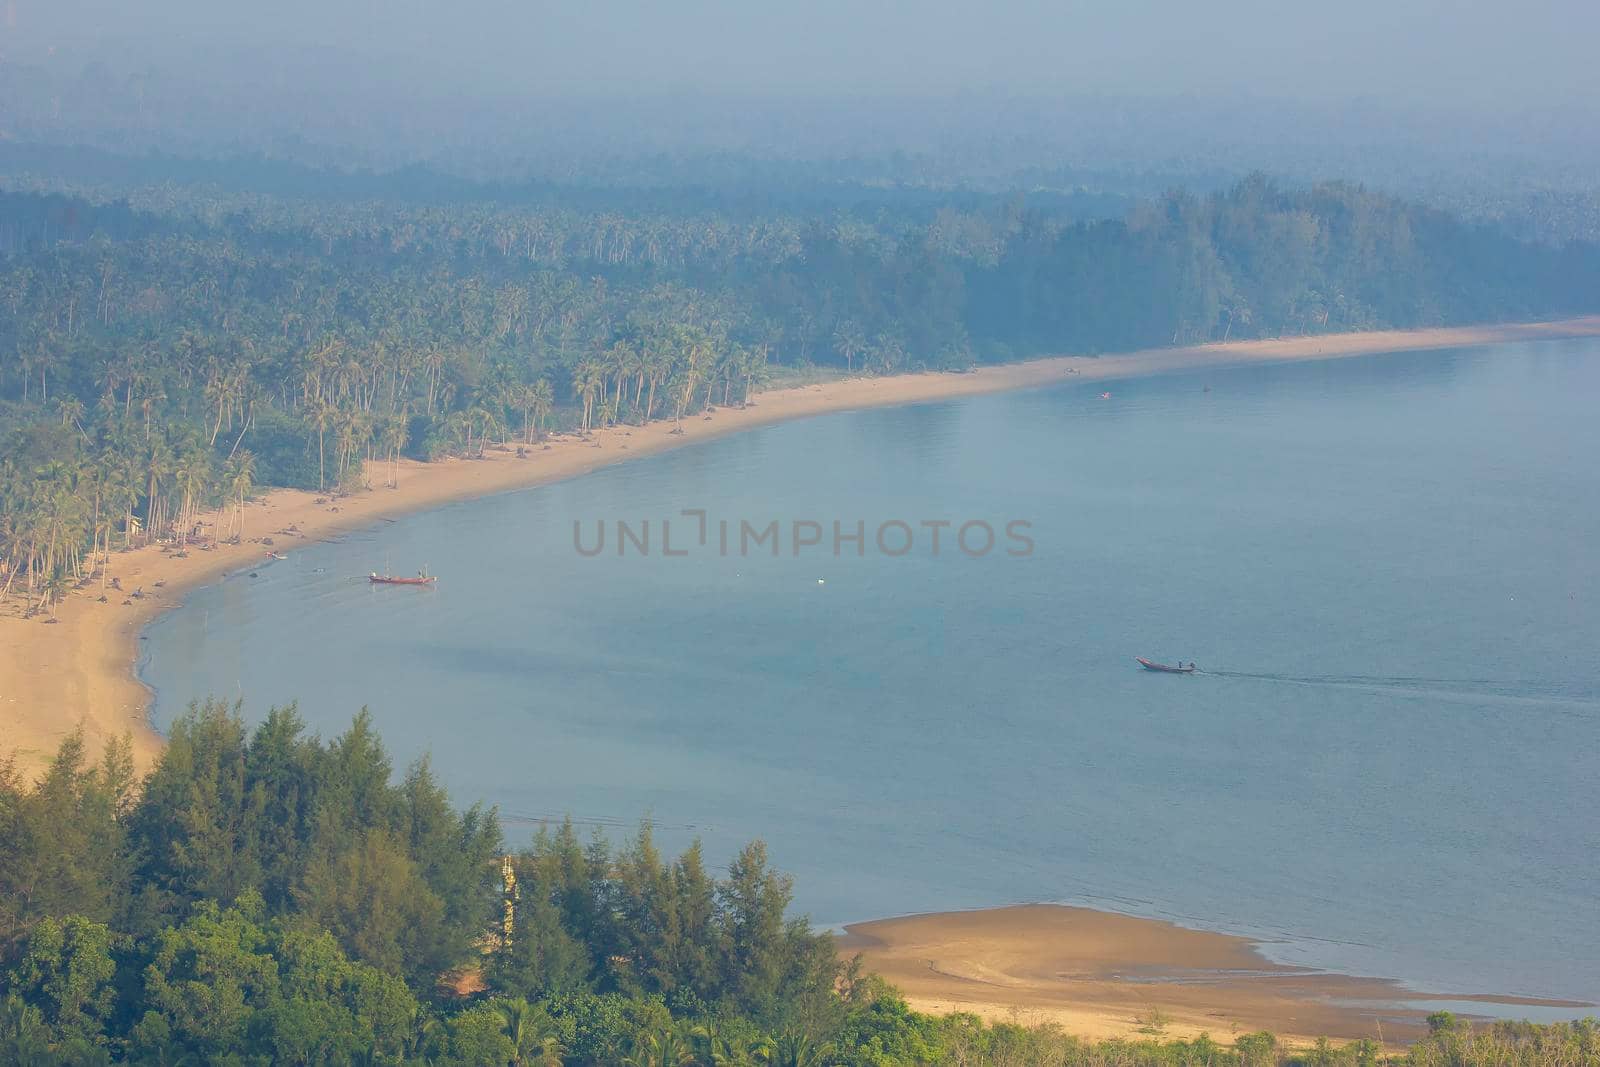 The beach at Chumphon, looking at the high angle from Khao Matree view point